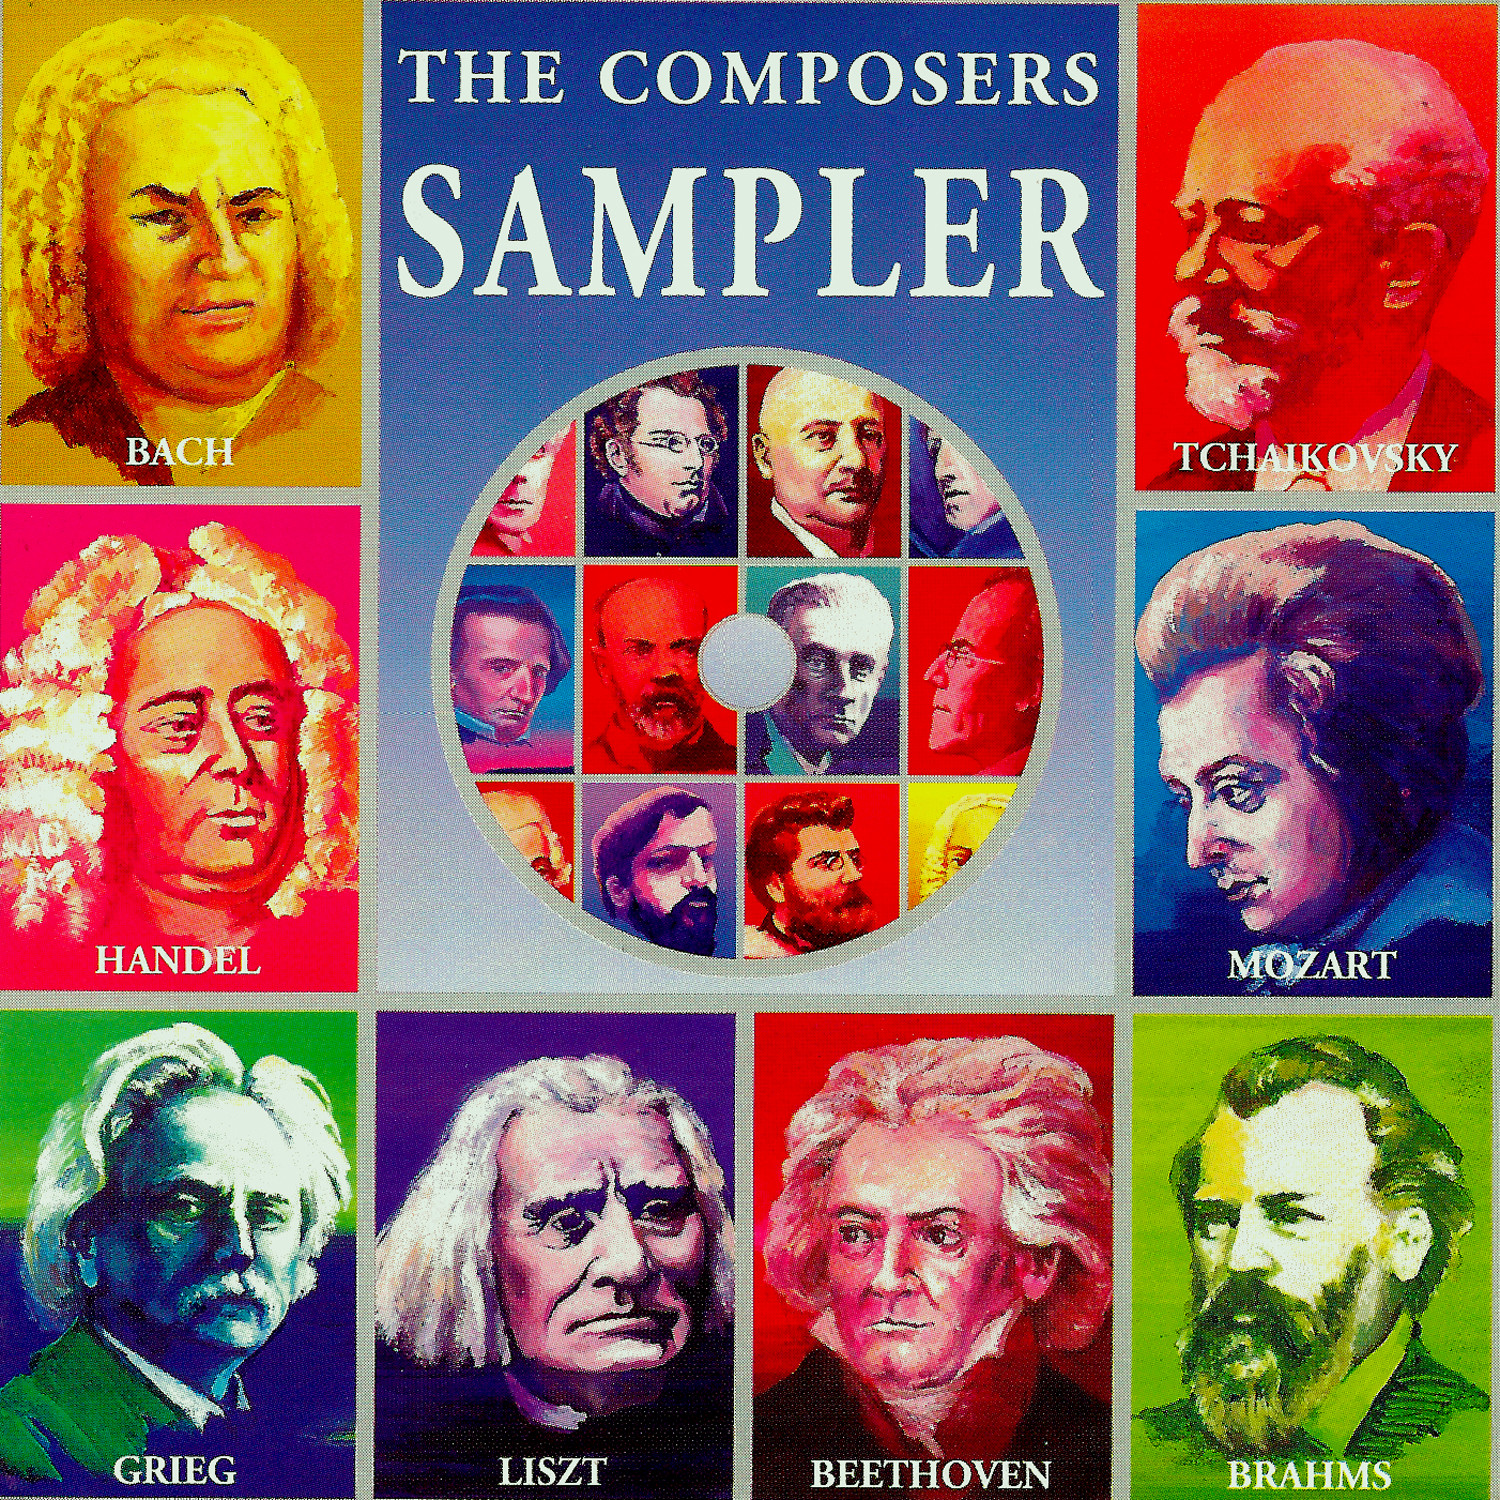 The Composers Sampler